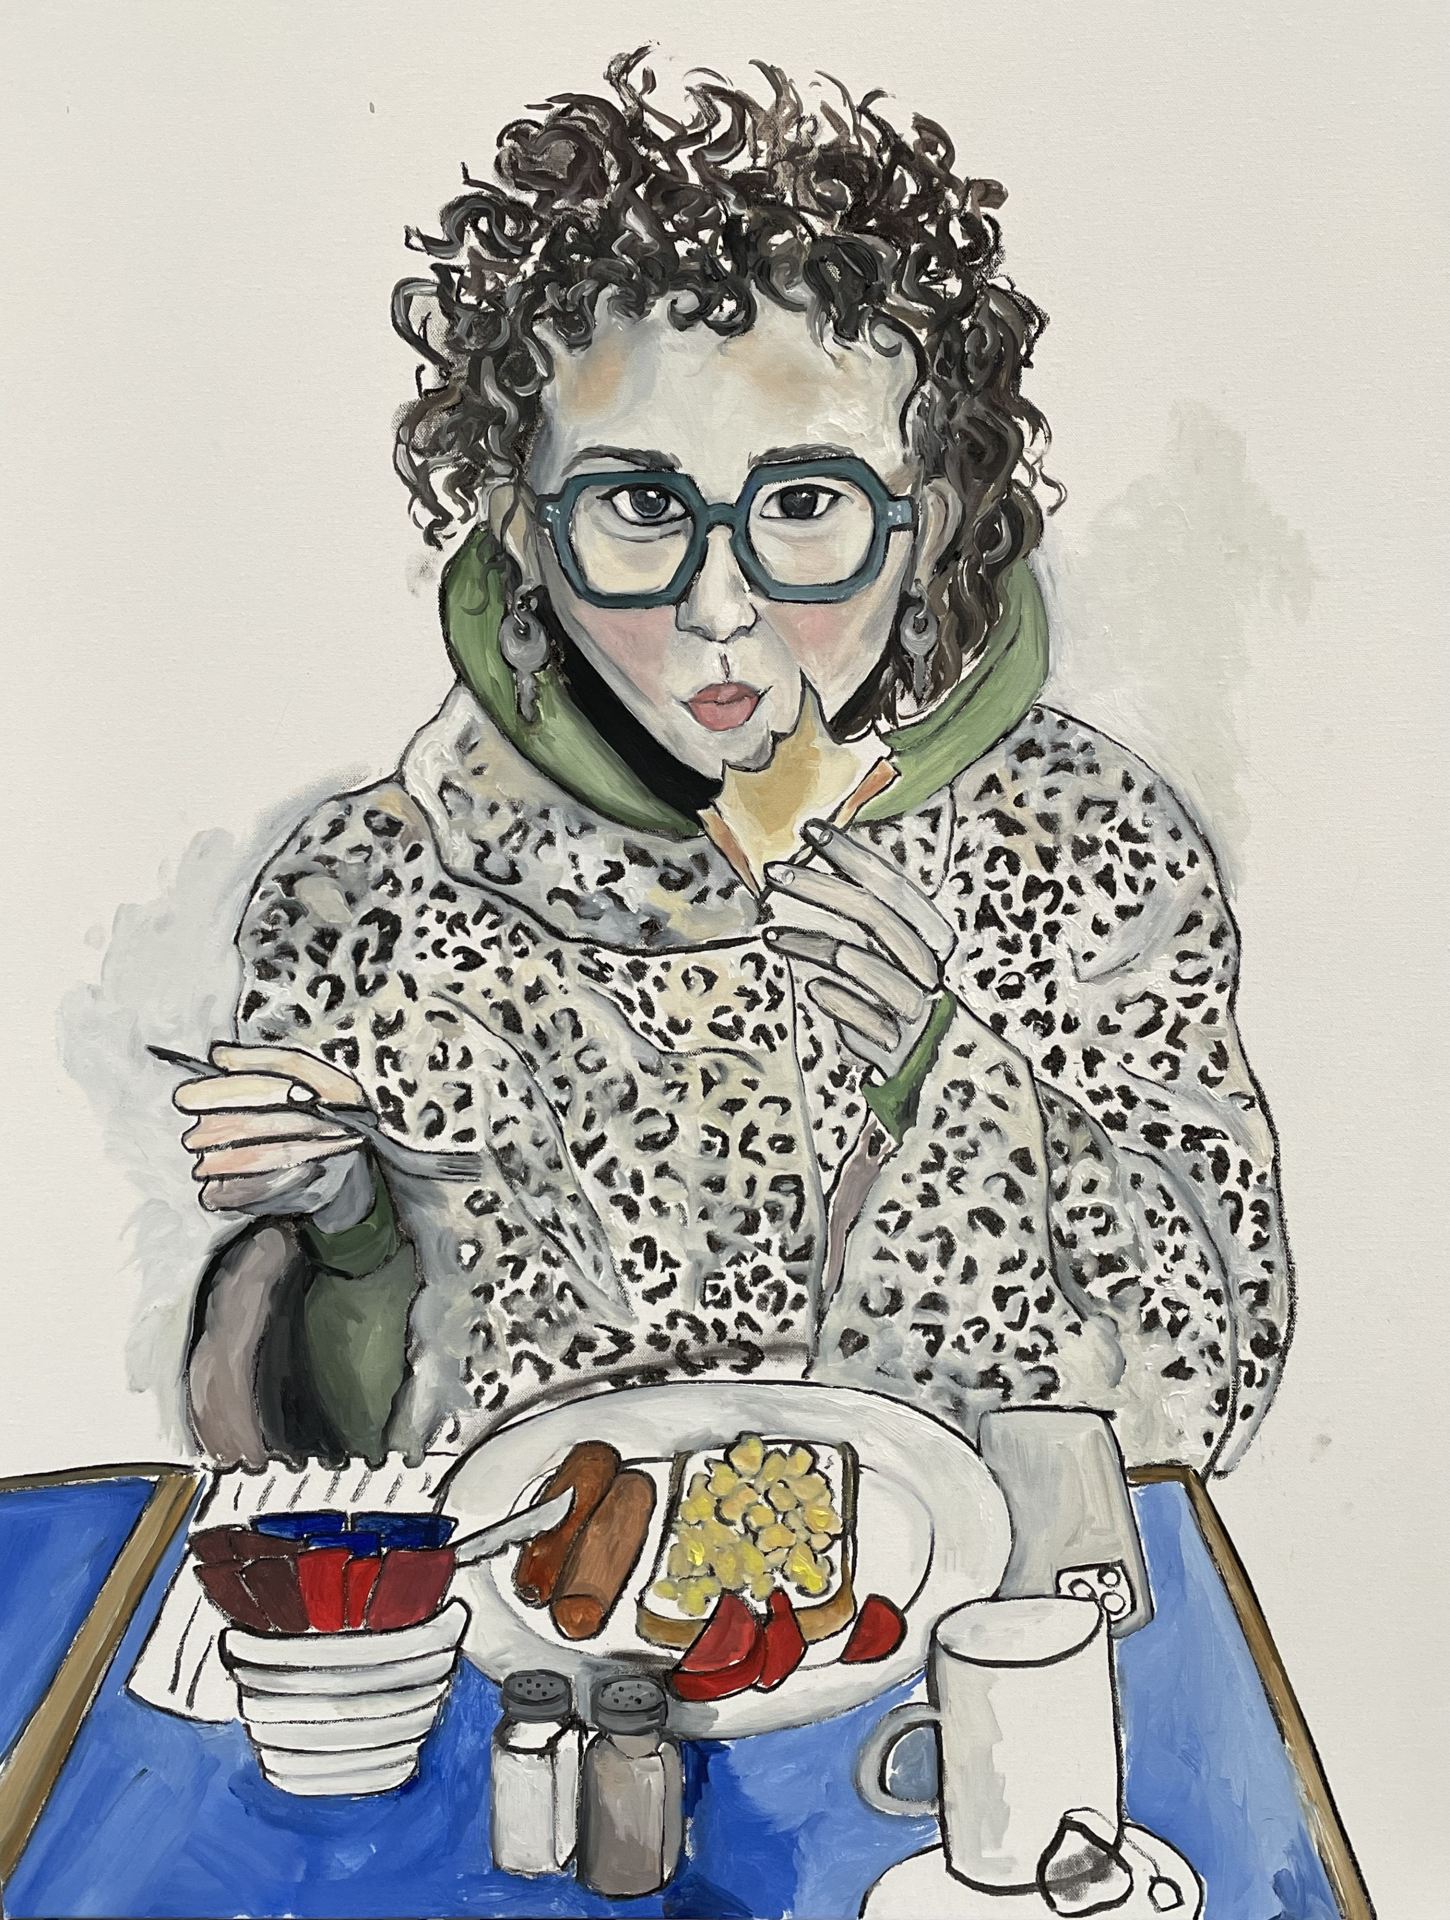 A painting of a person in a leopard skin coat eating a cooked breakfast.